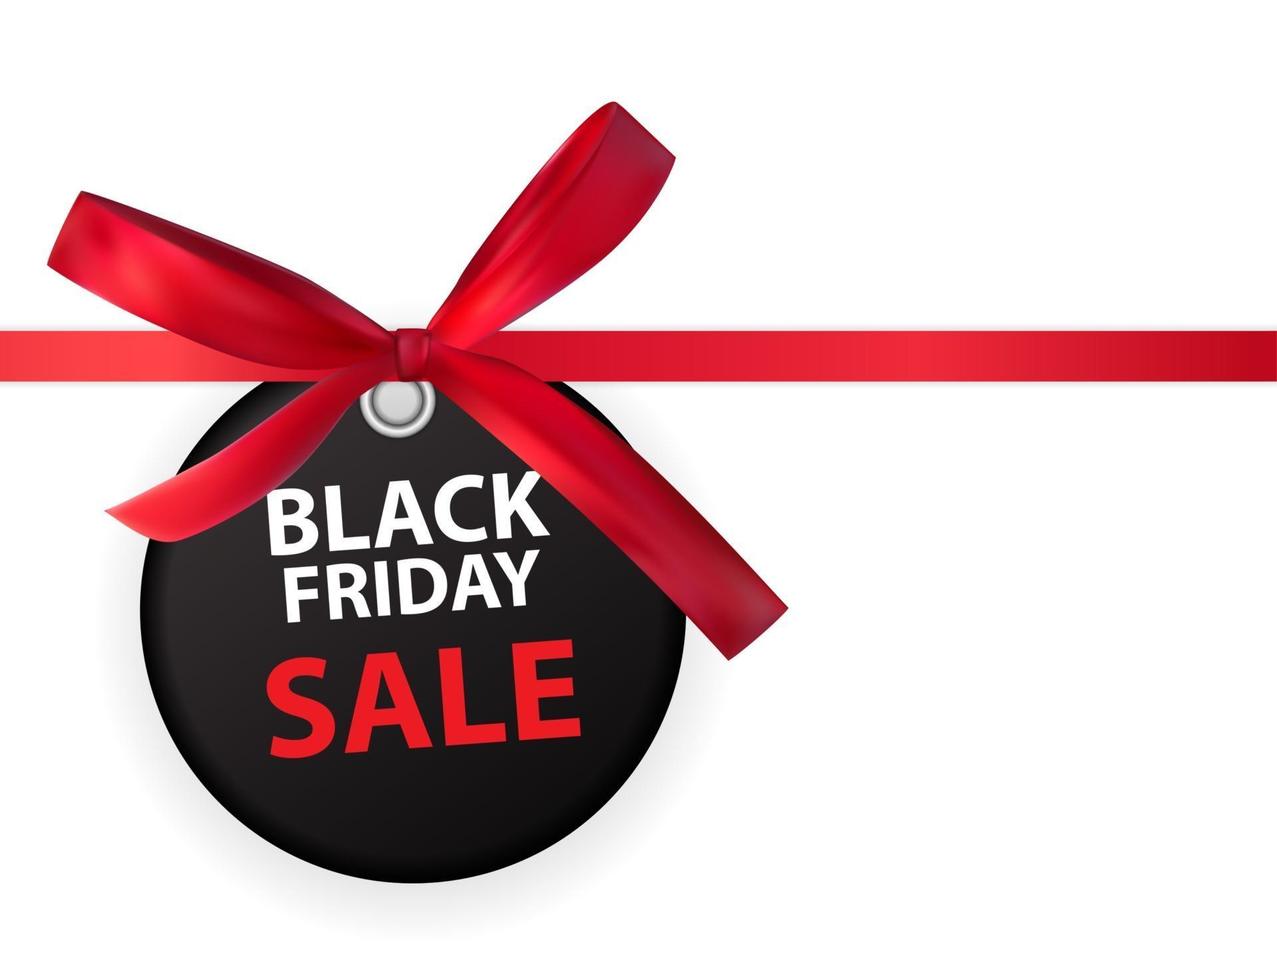 Black Friday Sale Labei with Bow and Ribbon Isolated on White Background Vector Illustration